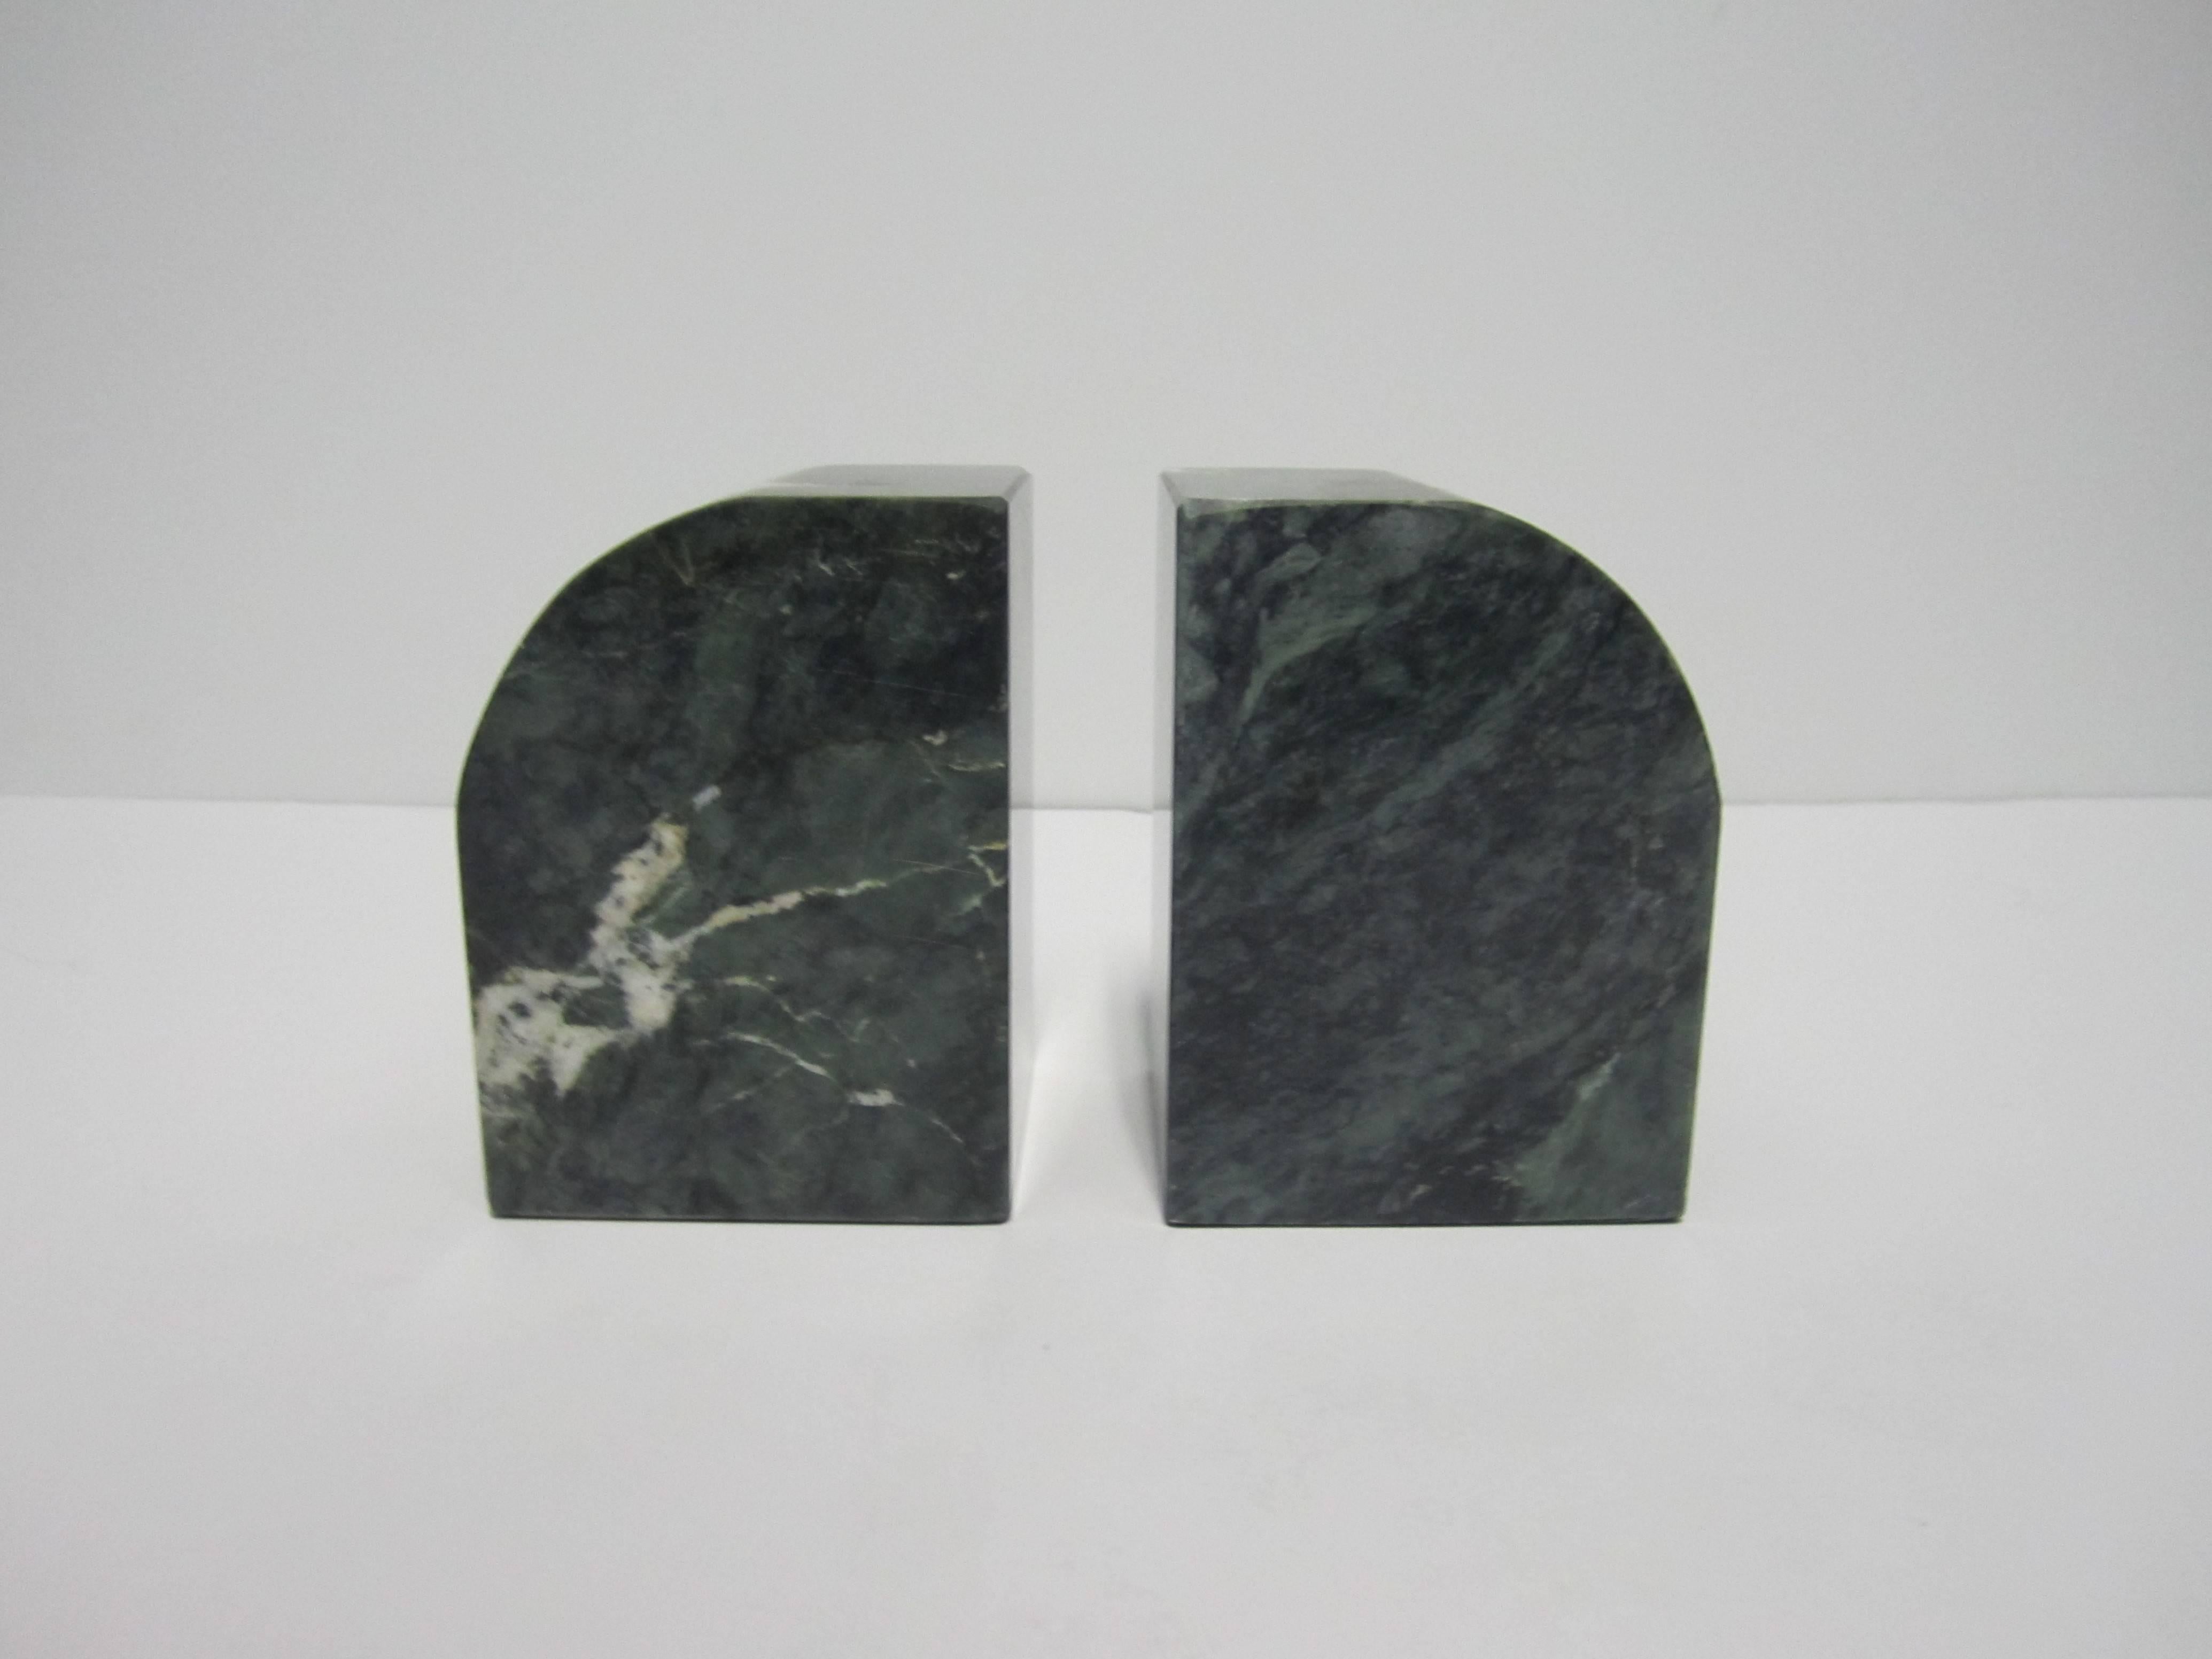 A substantial and chic pair of '70s Italian Modern or Post-Modern period dark green and white marble bookends, circa 1970s, Italy. Each measure: 5